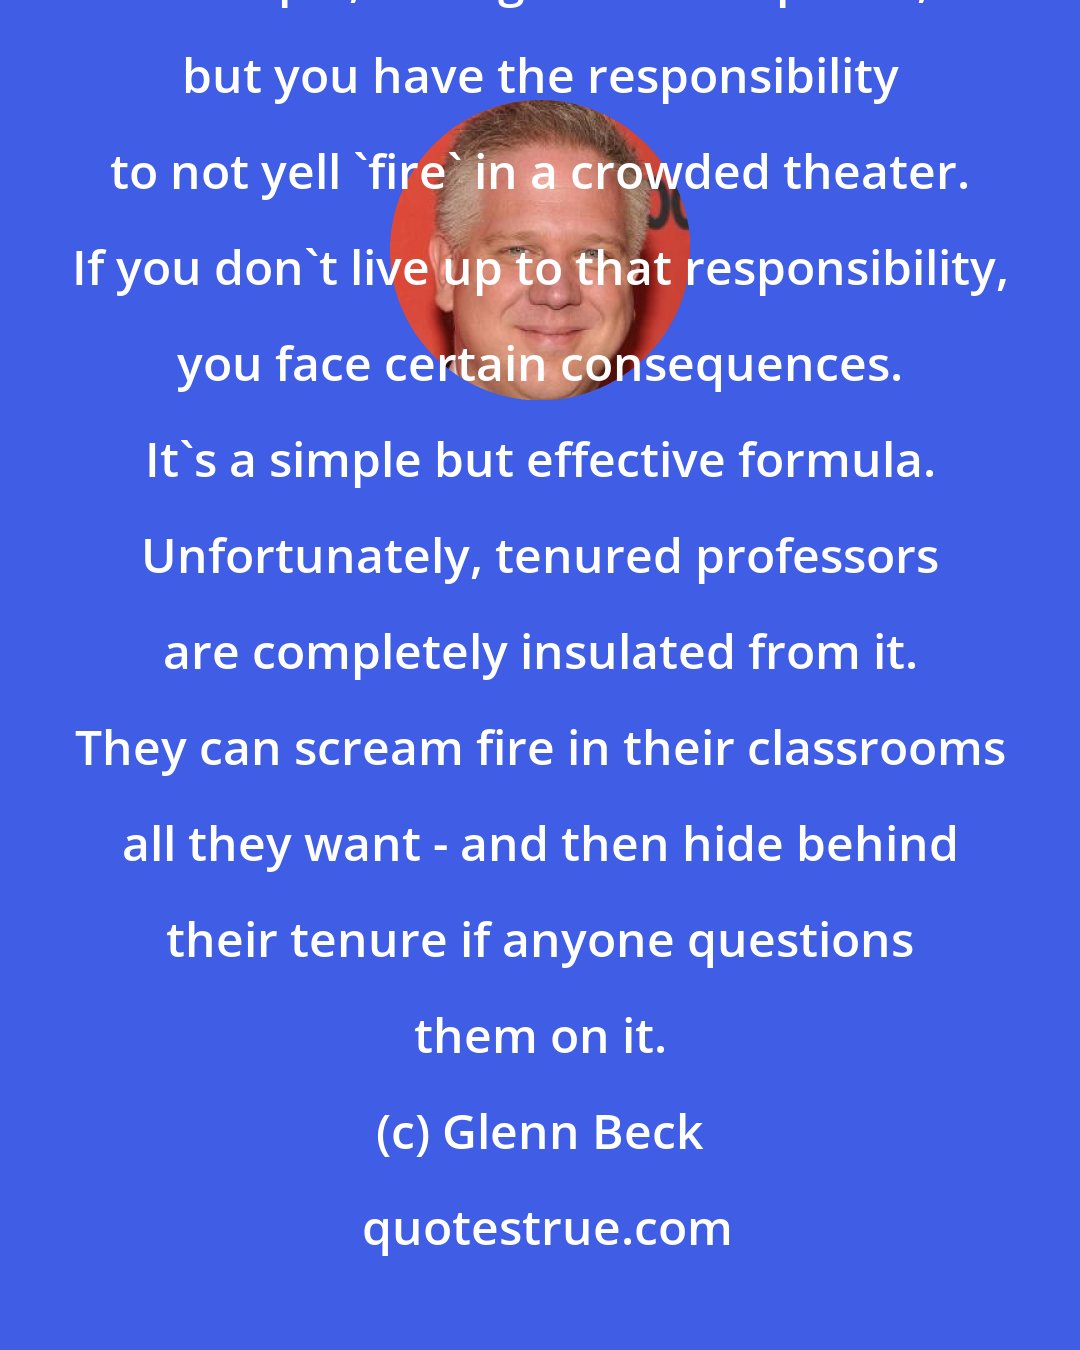 Glenn Beck: America comes with both rights and responsibilities. You have, for example, the right to free speech, but you have the responsibility to not yell 'fire' in a crowded theater. If you don't live up to that responsibility, you face certain consequences. It's a simple but effective formula. Unfortunately, tenured professors are completely insulated from it. They can scream fire in their classrooms all they want - and then hide behind their tenure if anyone questions them on it.